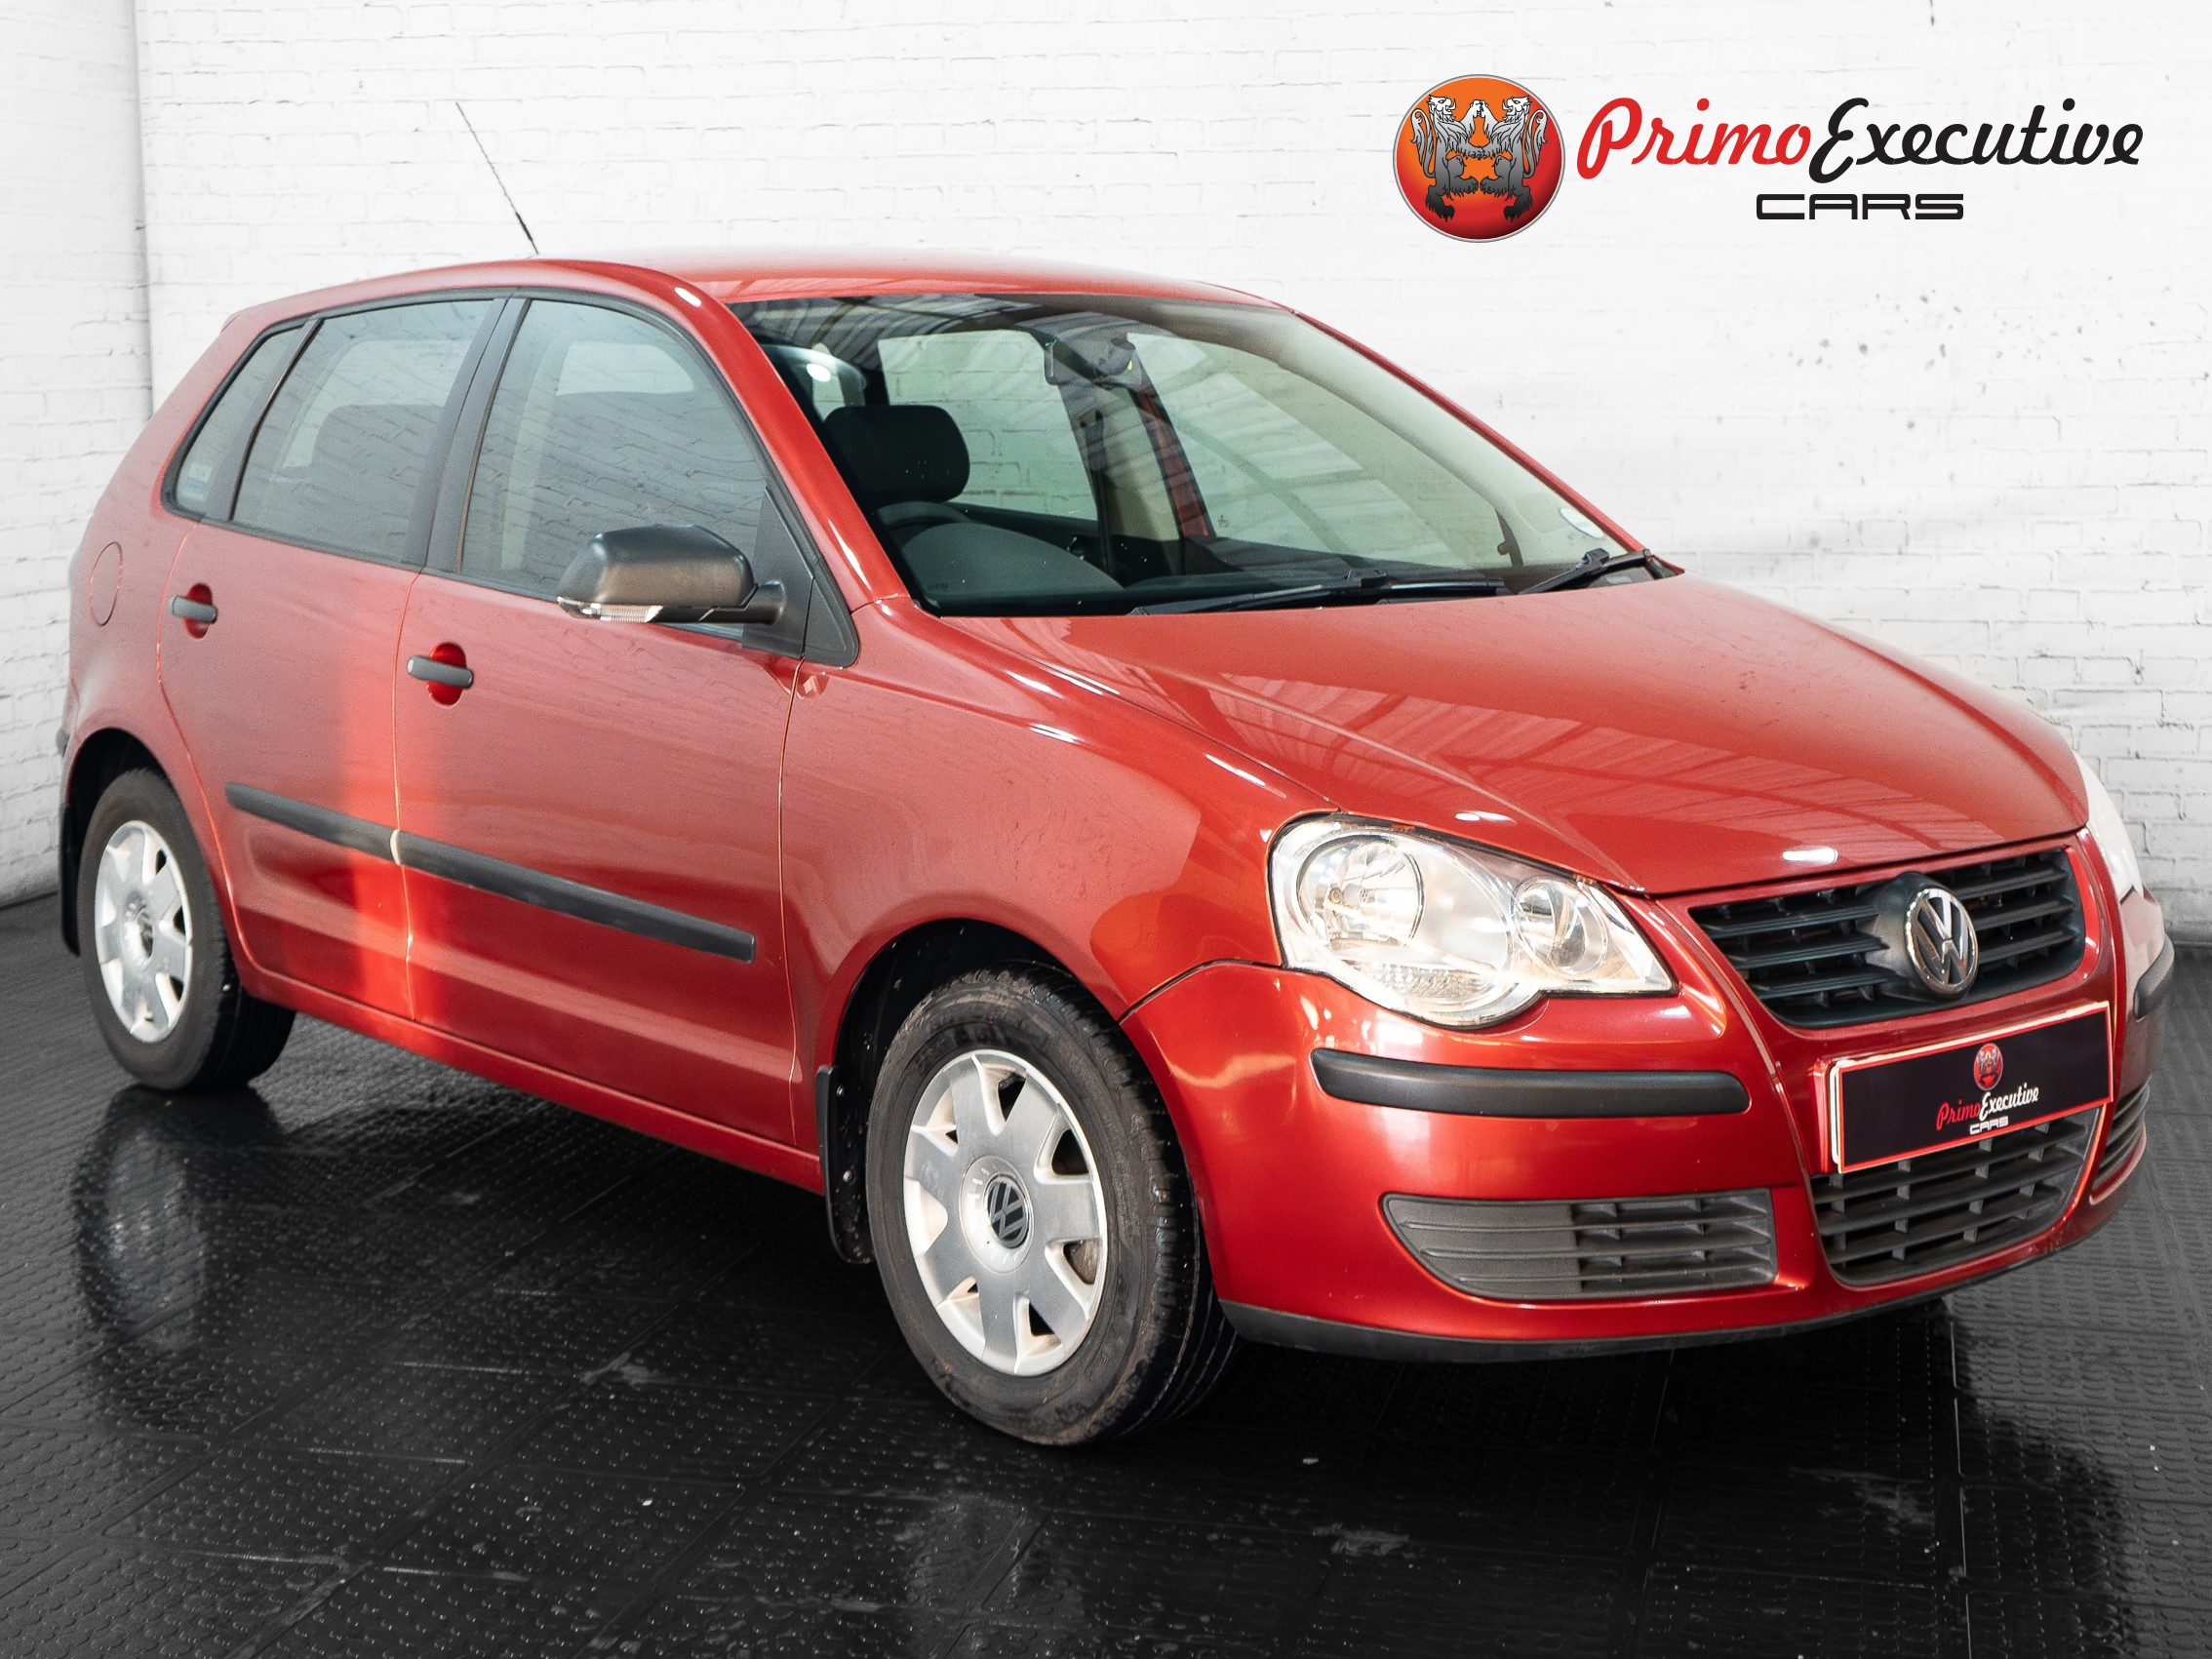 2006 Volkswagen Polo Hatch  for sale - 510580